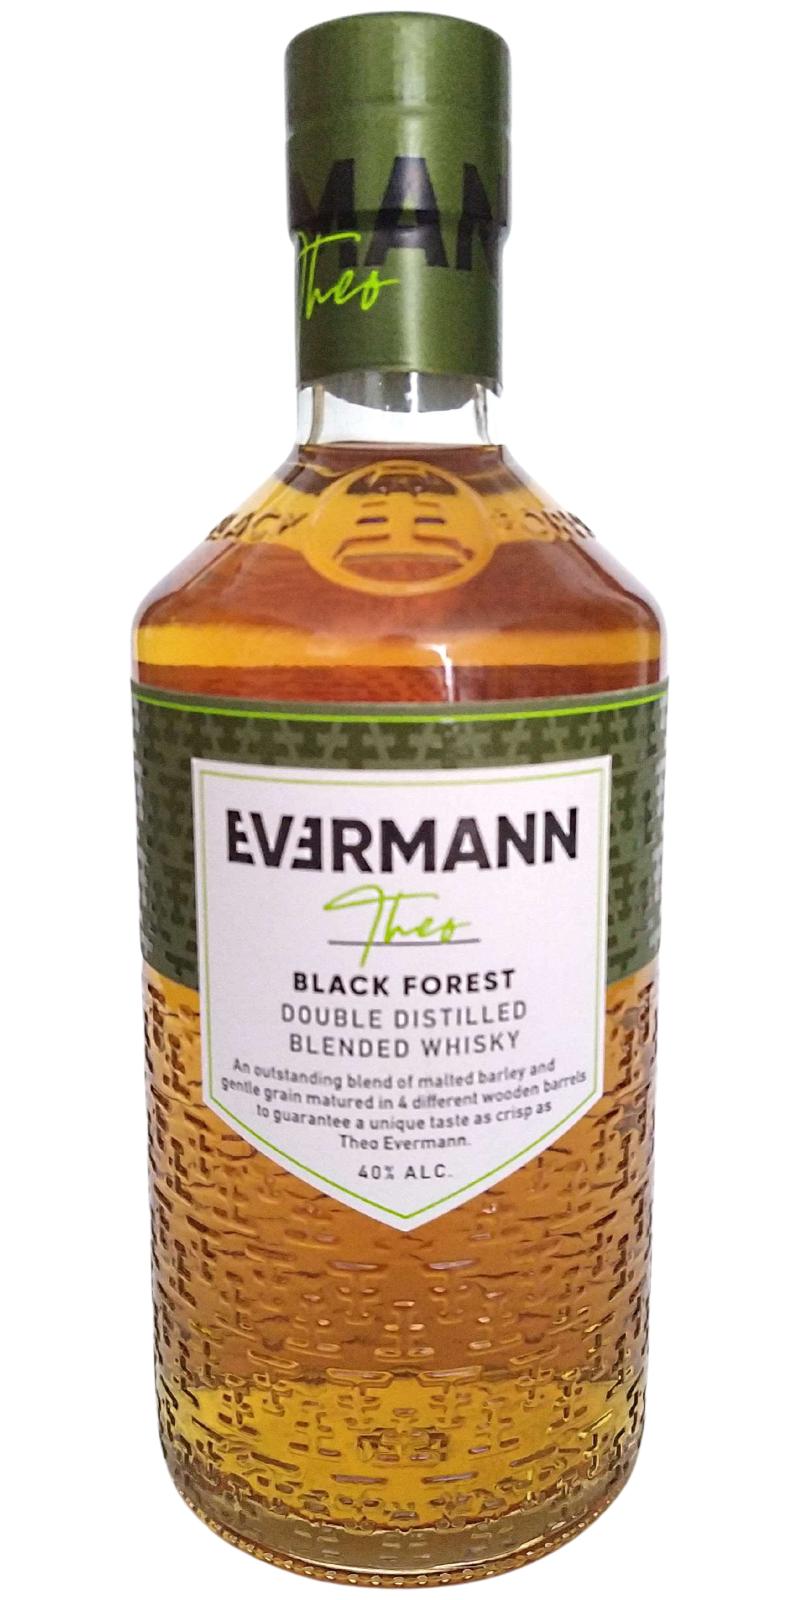 Evermann Theo - Ratings and reviews - Whiskybase